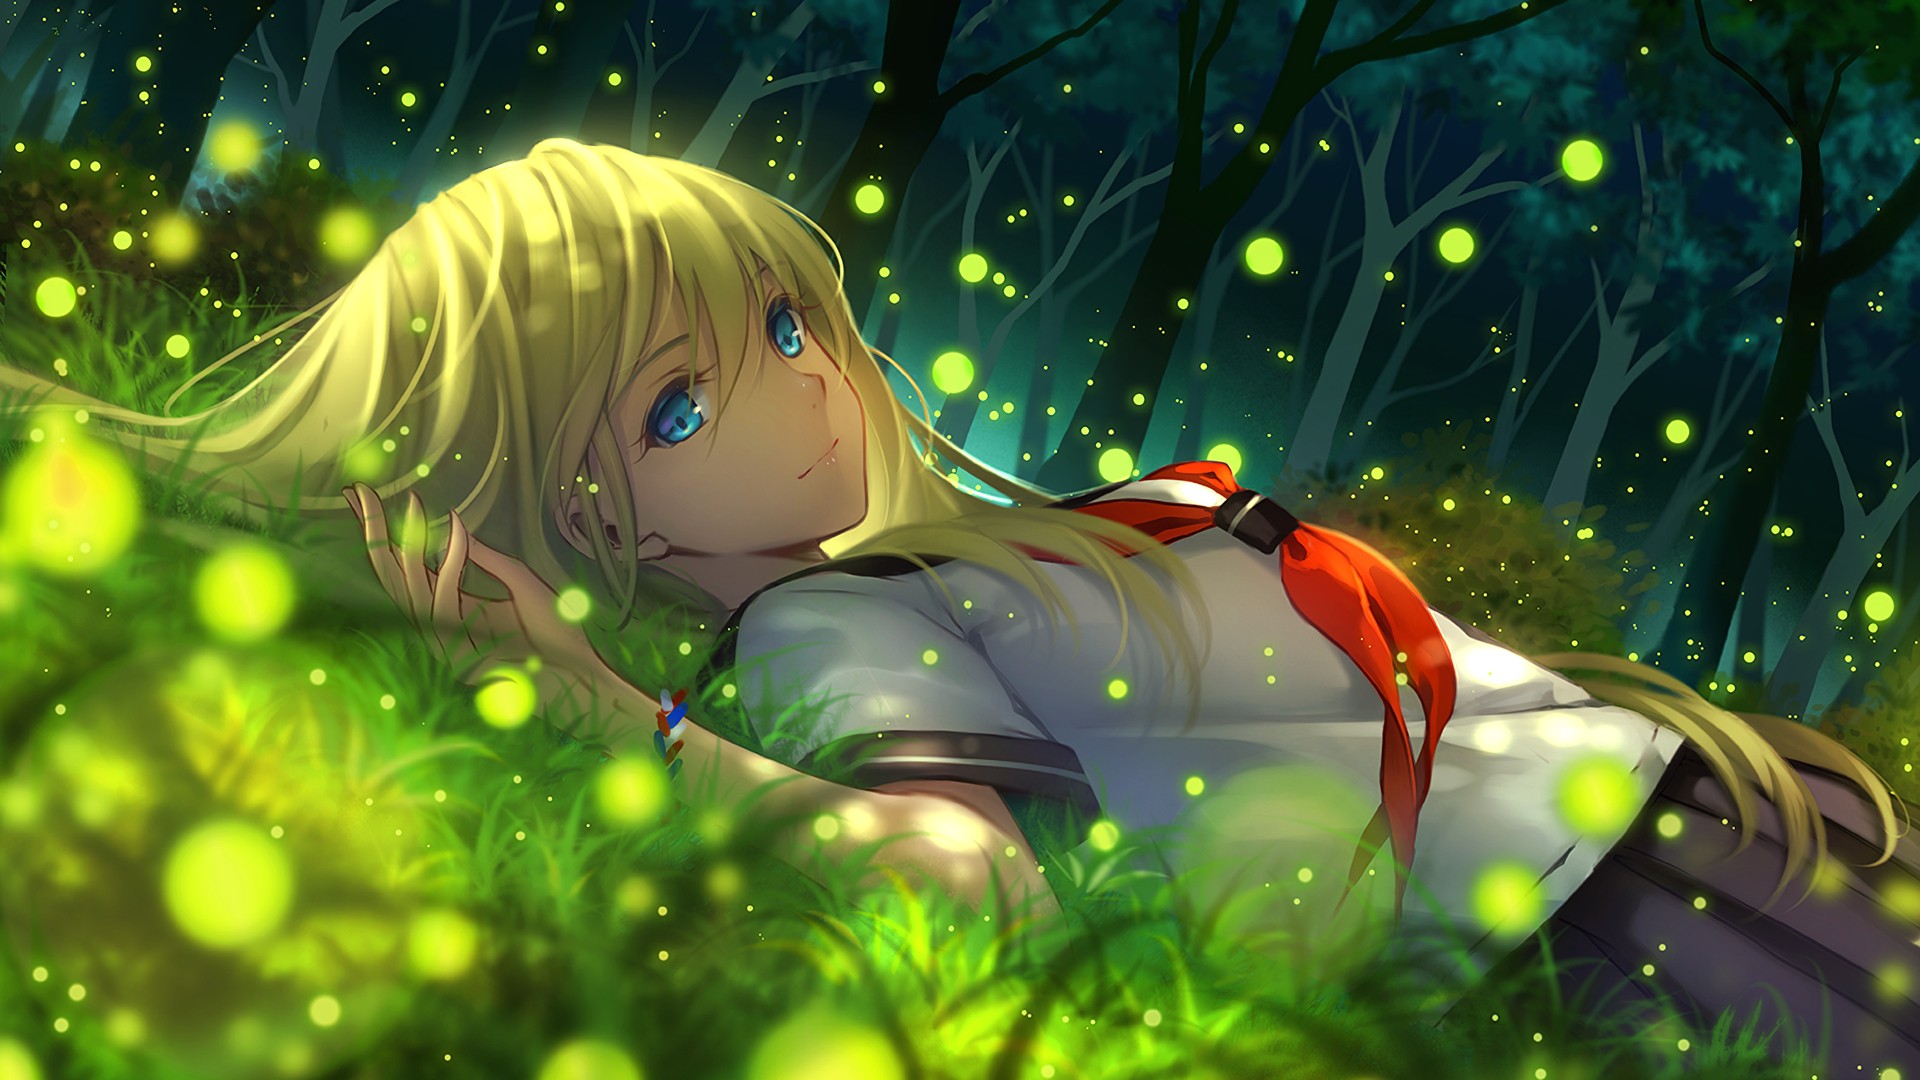 Anime 1920x1080 original characters blonde sailor uniform blue eyes Tidsean grass particle looking at viewer fireflies lying down nature colorful tie women outdoors outdoors Pixiv anime anime girls